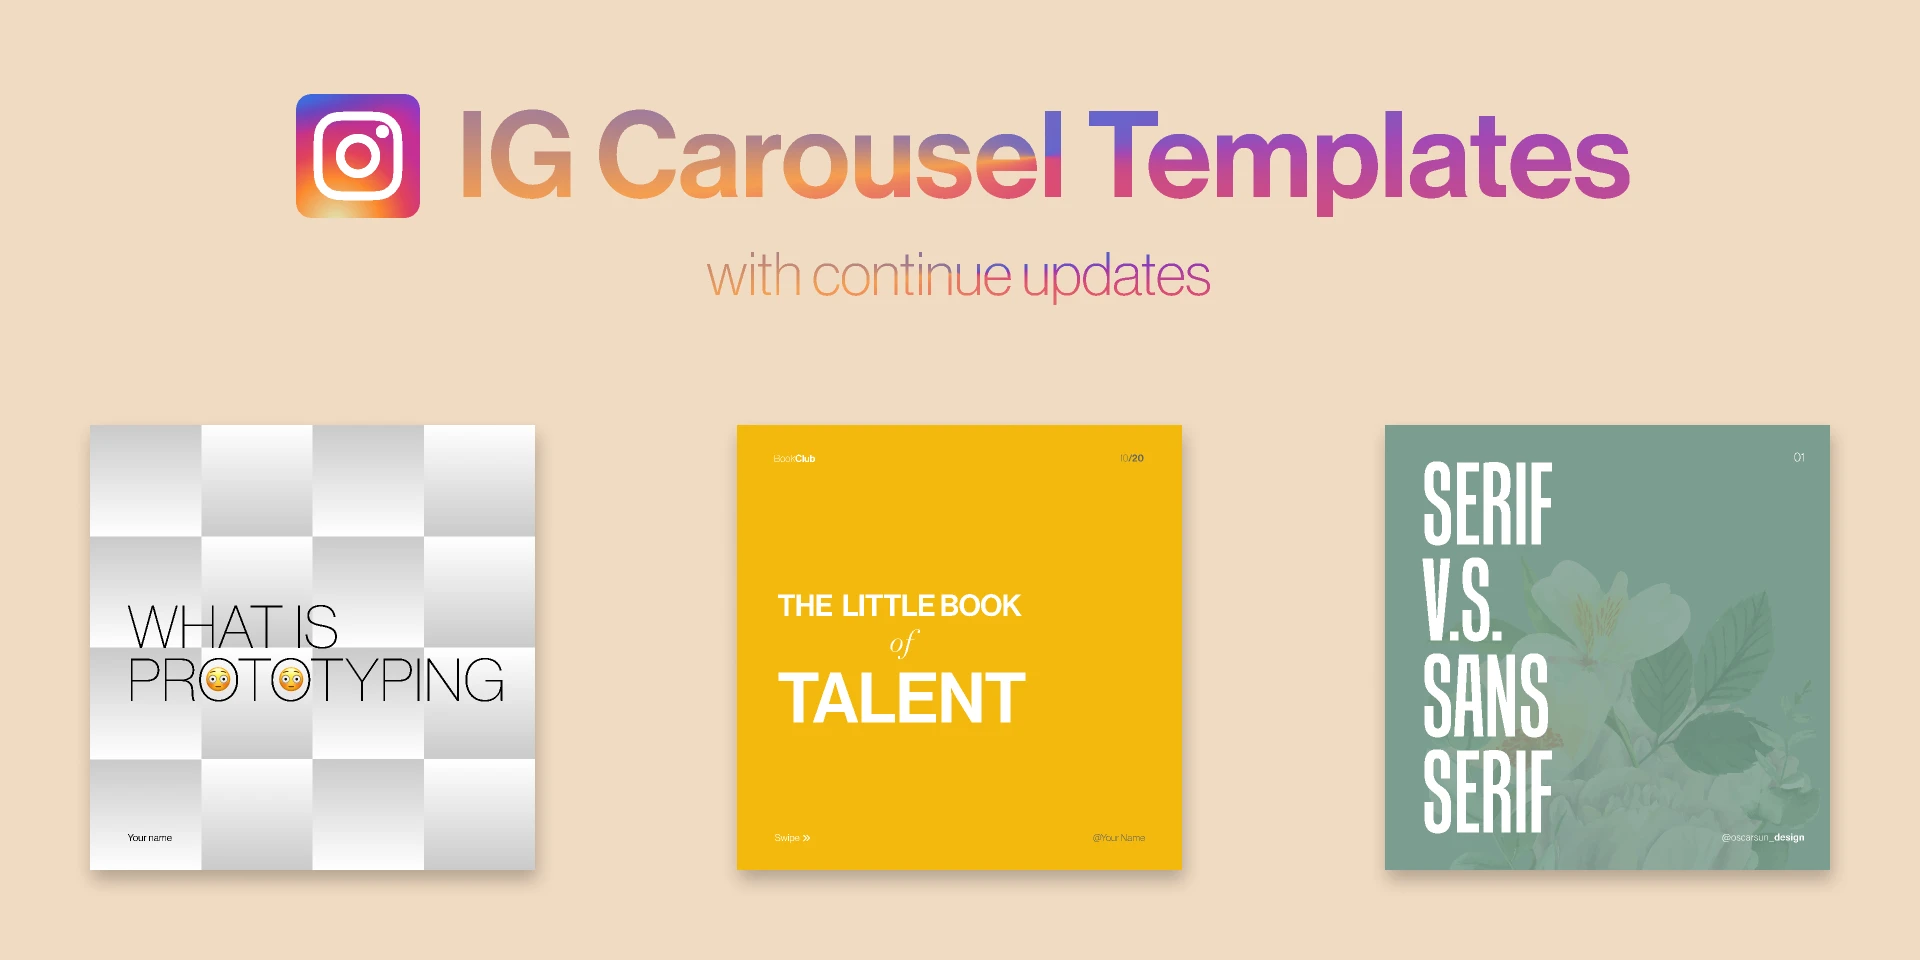 IG/Instagram Carousel Template for Figma and Adobe XD